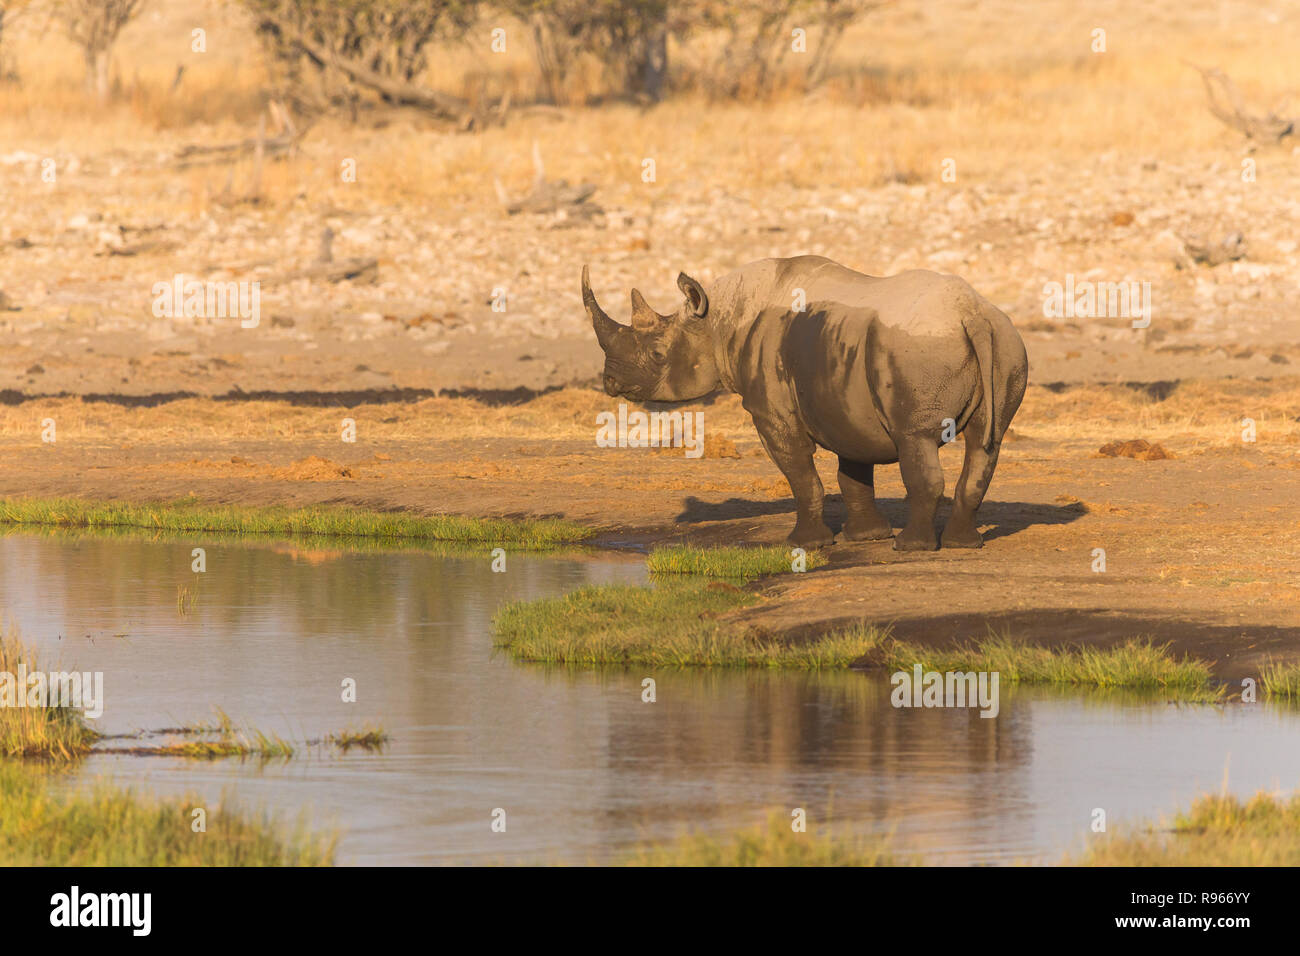 White Rhino or Rhinoceros mud covered, stands next to a water hole or watering hole in the savannah in Etosha National Park in Namibia Stock Photo